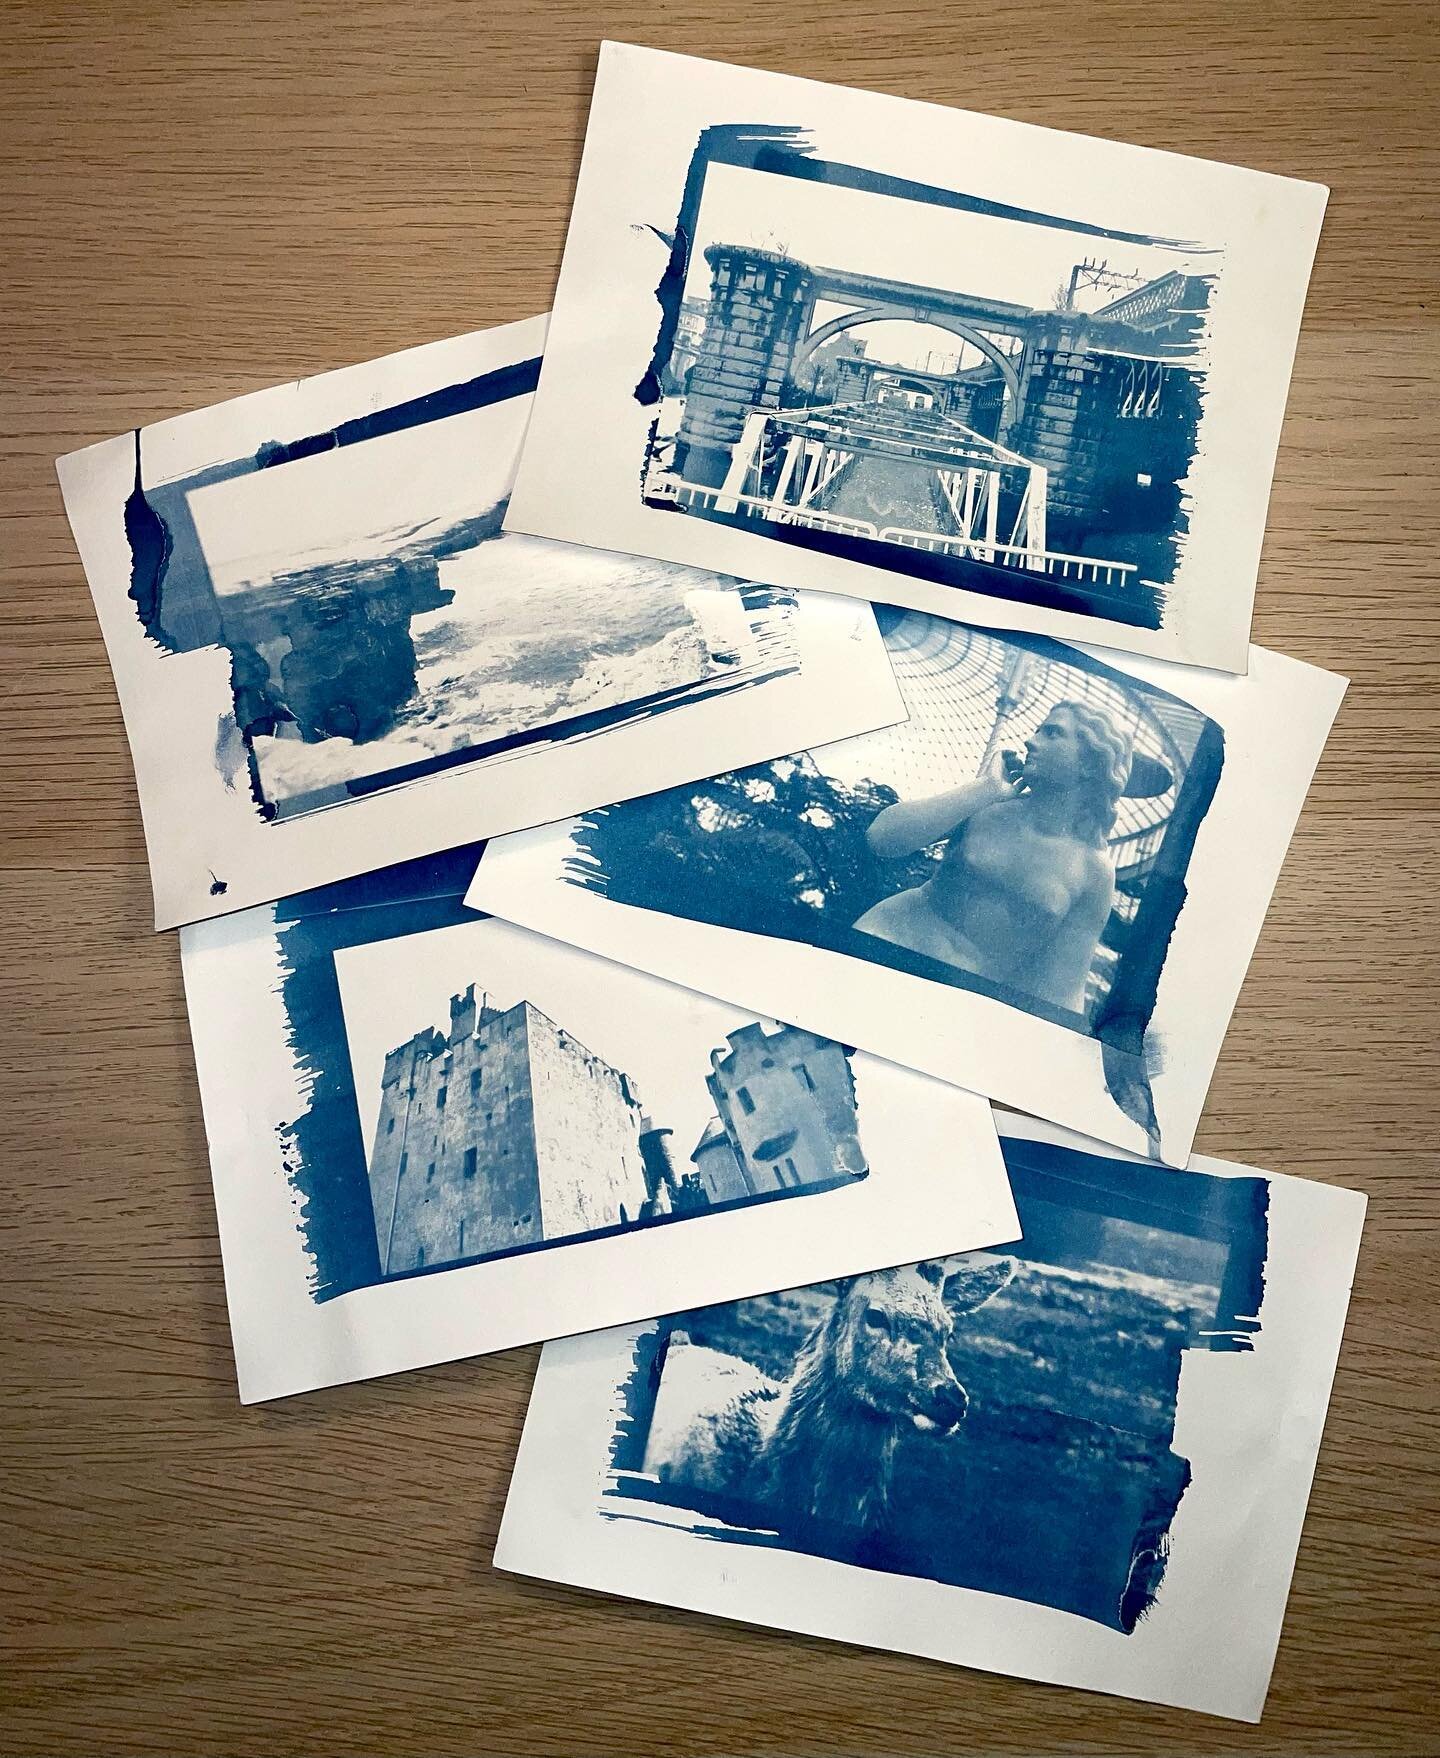 I am so excited to share the introduction of my cyanotype postcards. 

Cyanotyping is an alternative process I learned in school, and I have been experimenting with it and practicing for quite some time.  These are one-of-a-kind prints of photos from